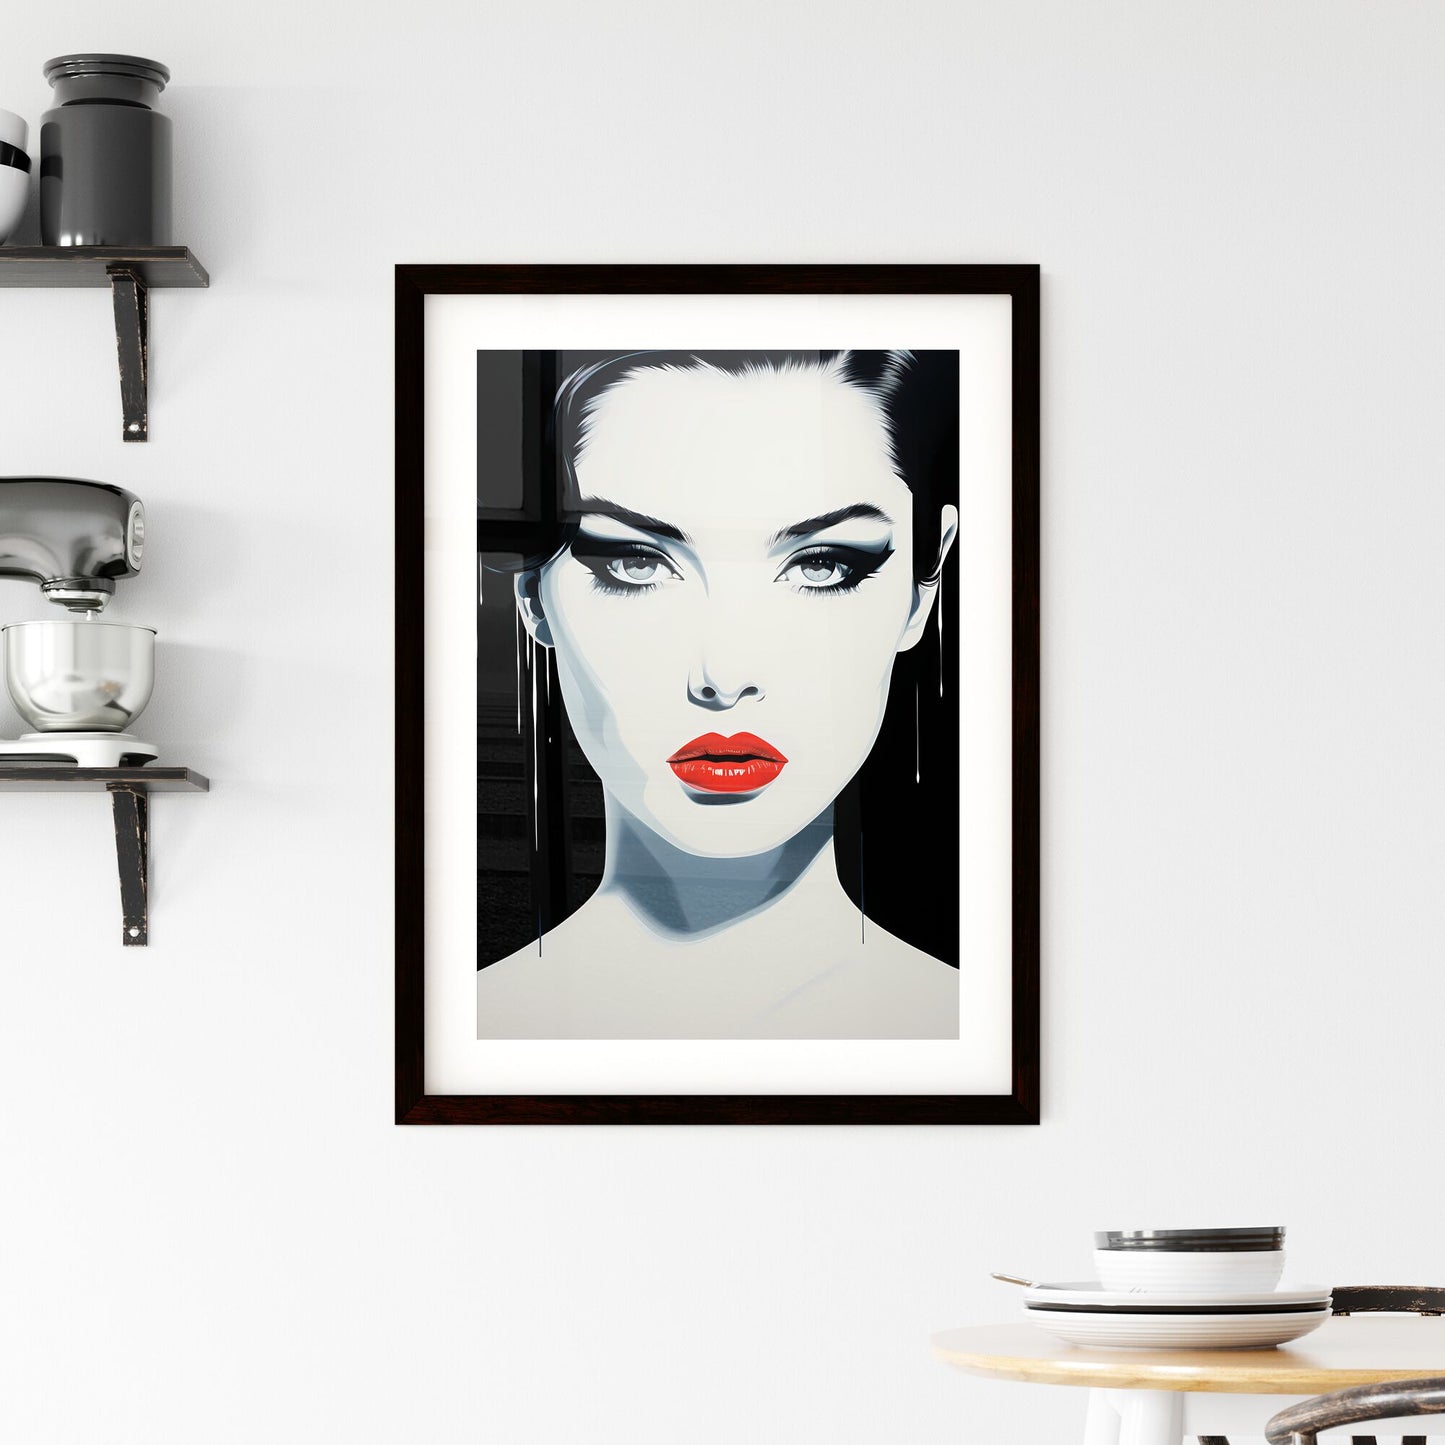 A Poster of Illustration Manga - A Woman With Red Lips And Black Hair Default Title